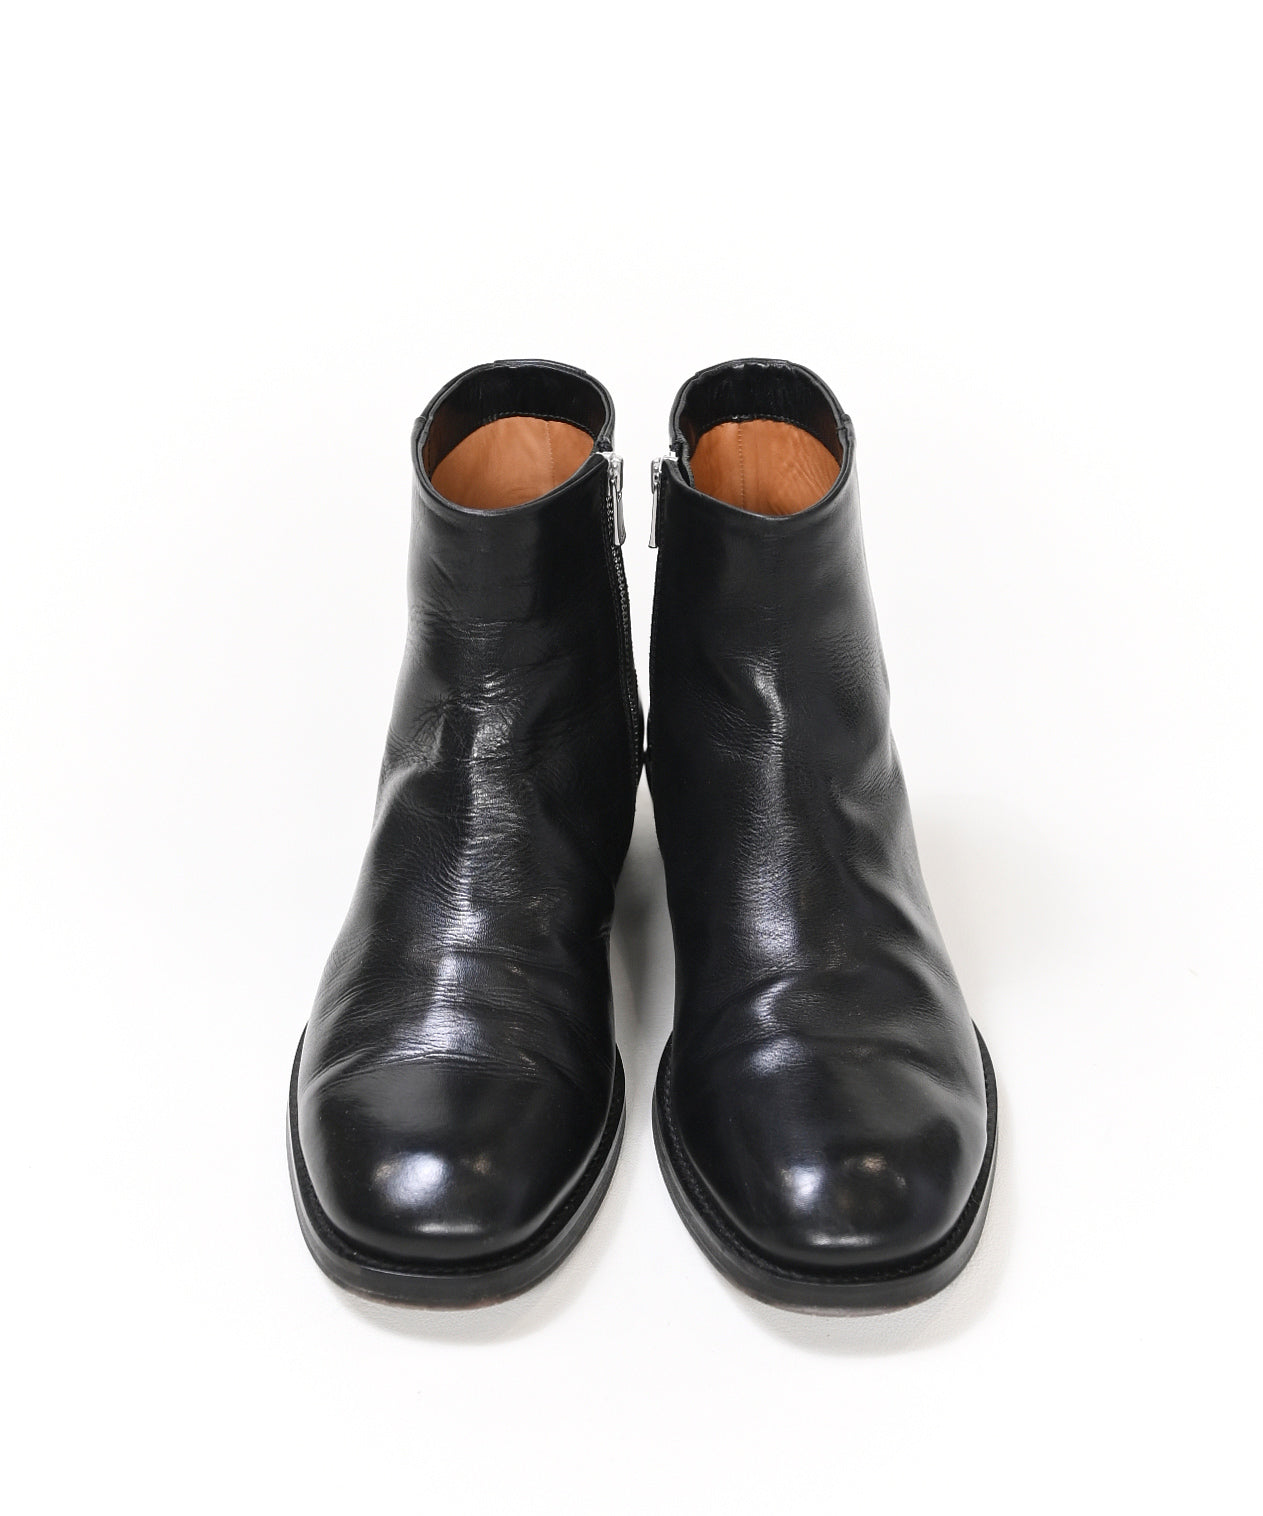 New side zip boots / ER1201 – EARLE(アール)｜公式オンラインストア ...